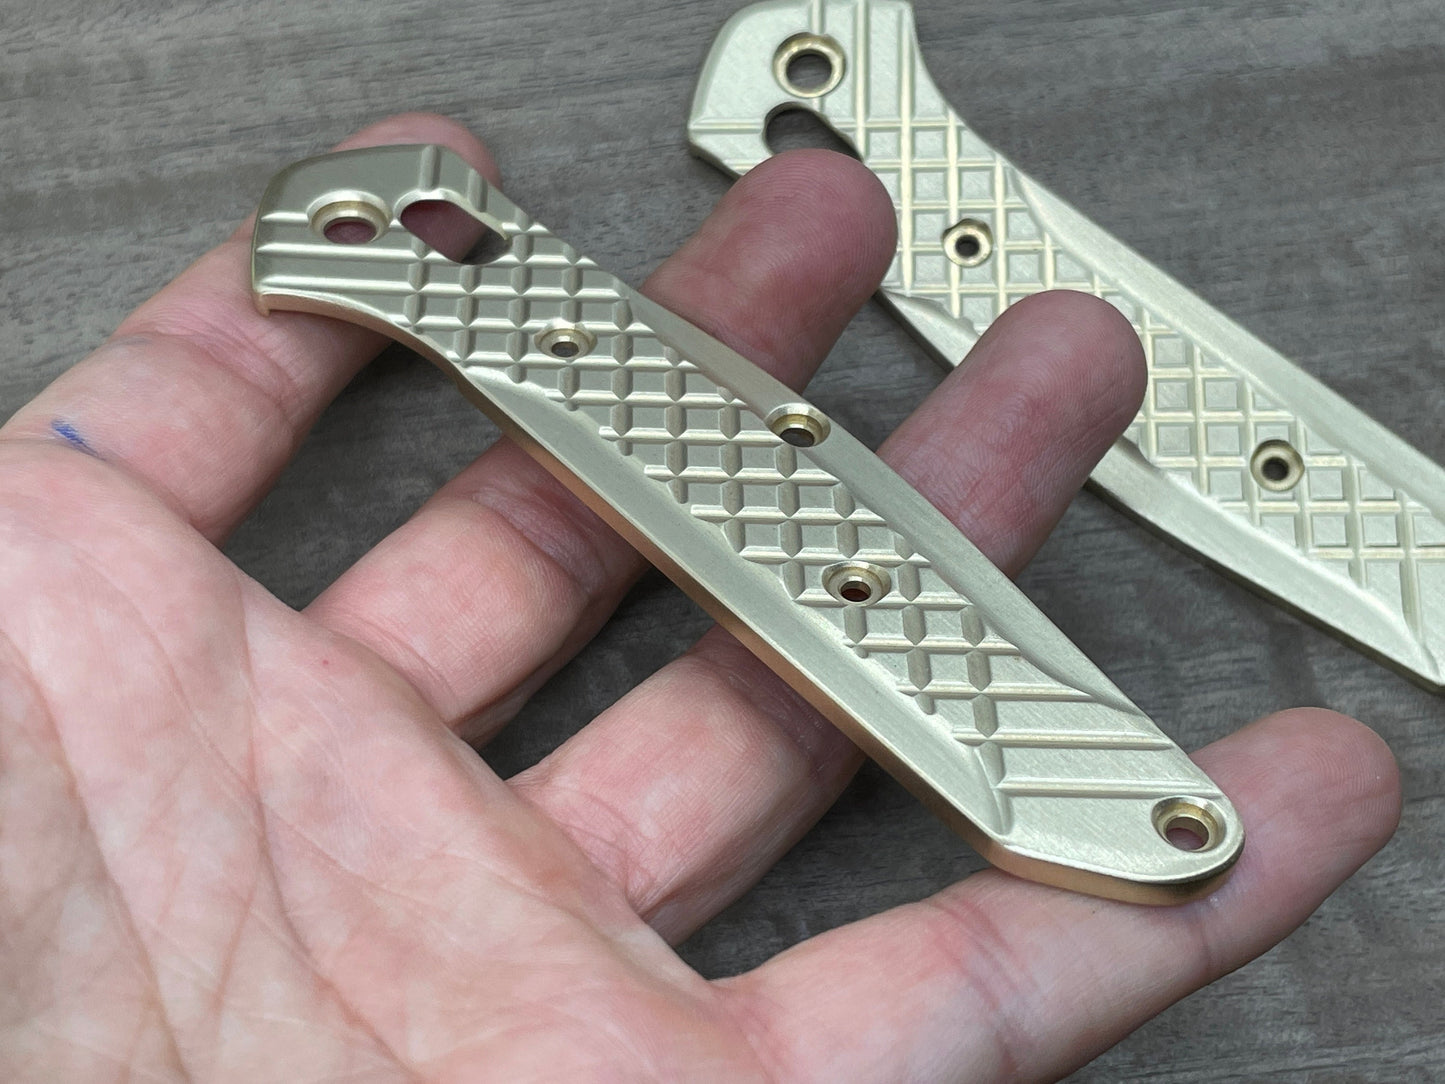 FRAG Cnc milled Brass Scales for Benchmade 940 Osborne